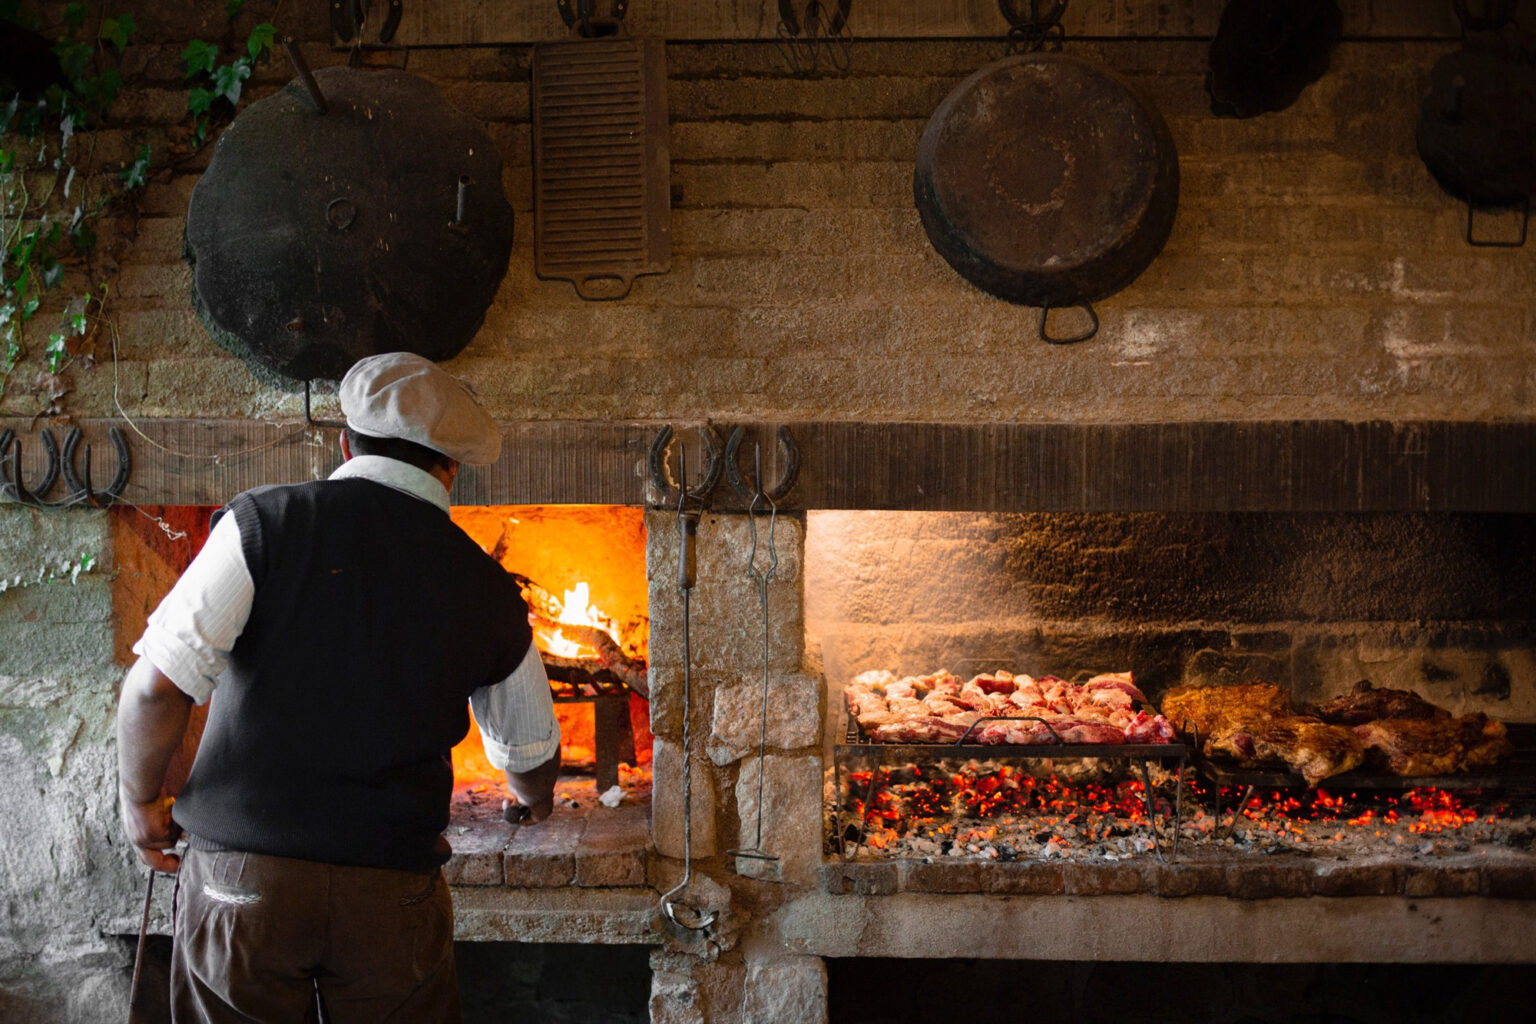 Man tending to typical Argentine parrilla grill